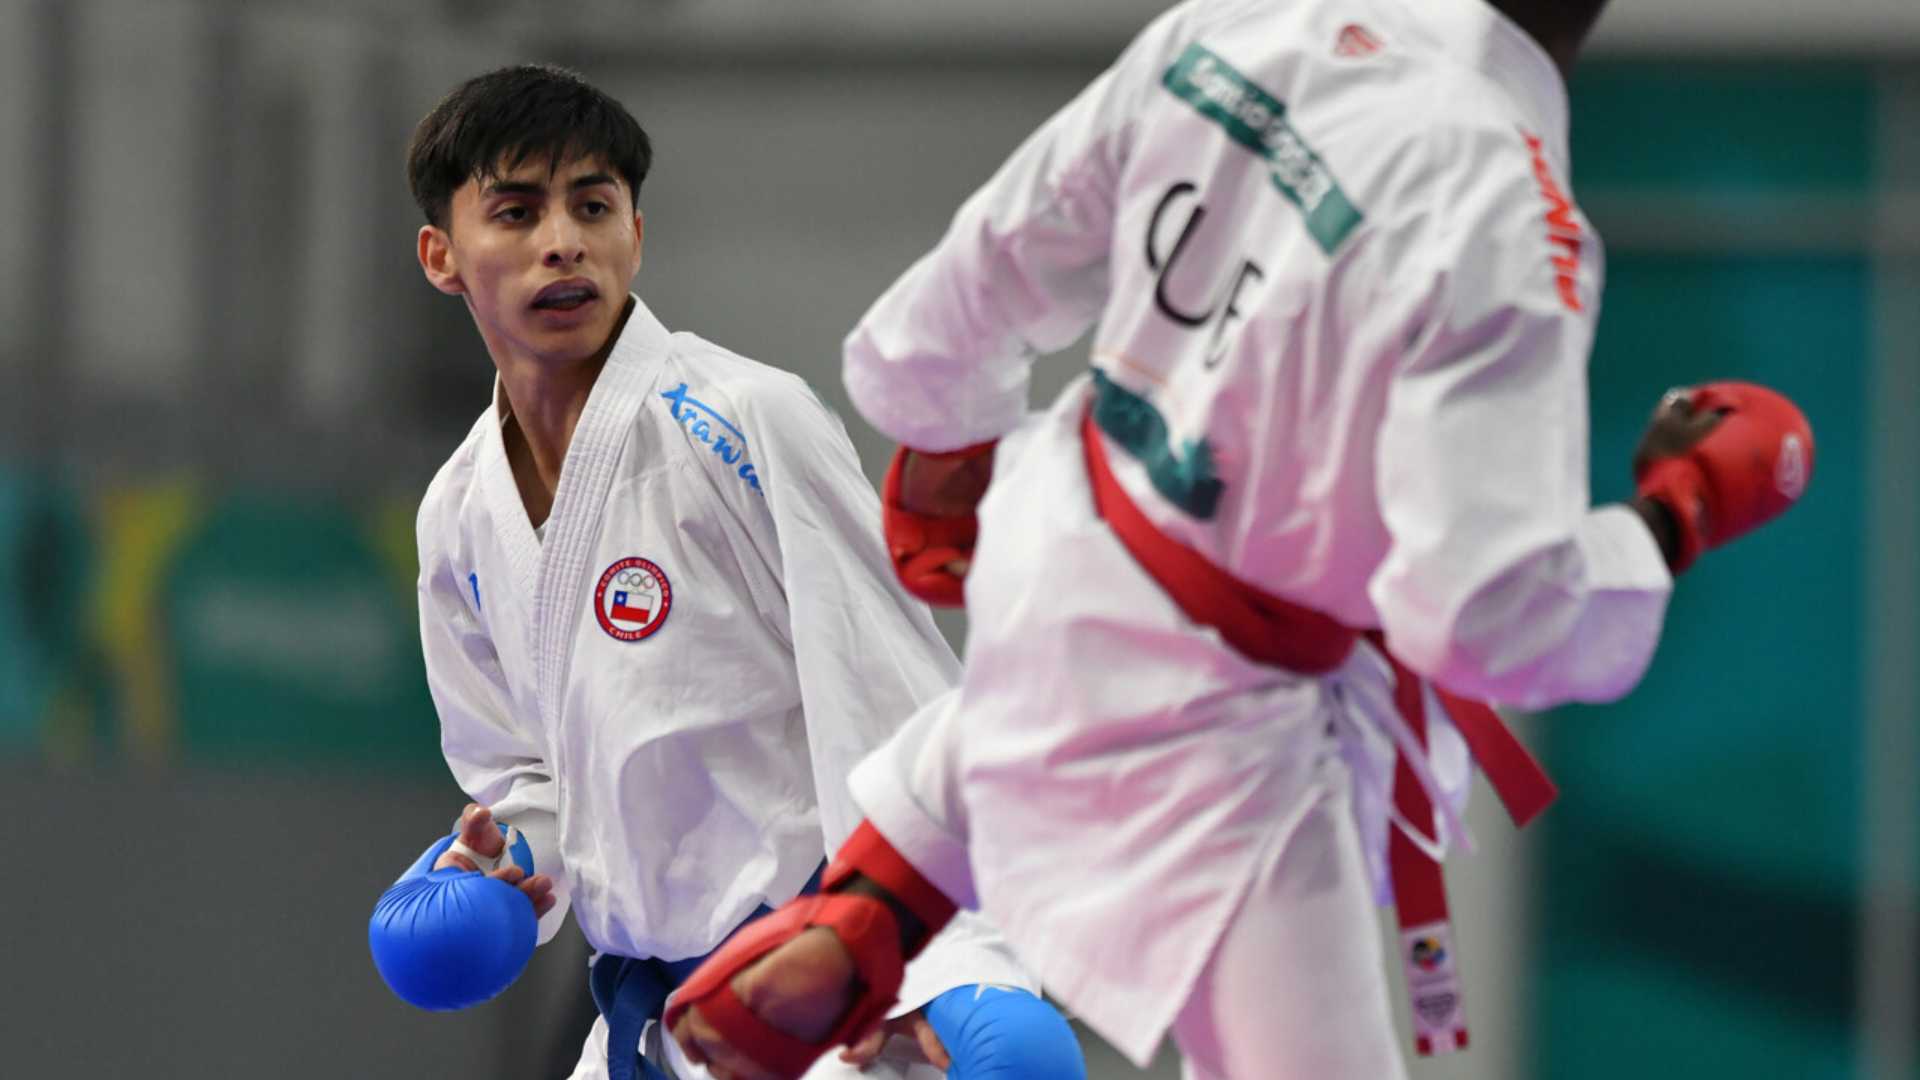 Chileans up to date: Celebrating gold in karate and a medal record